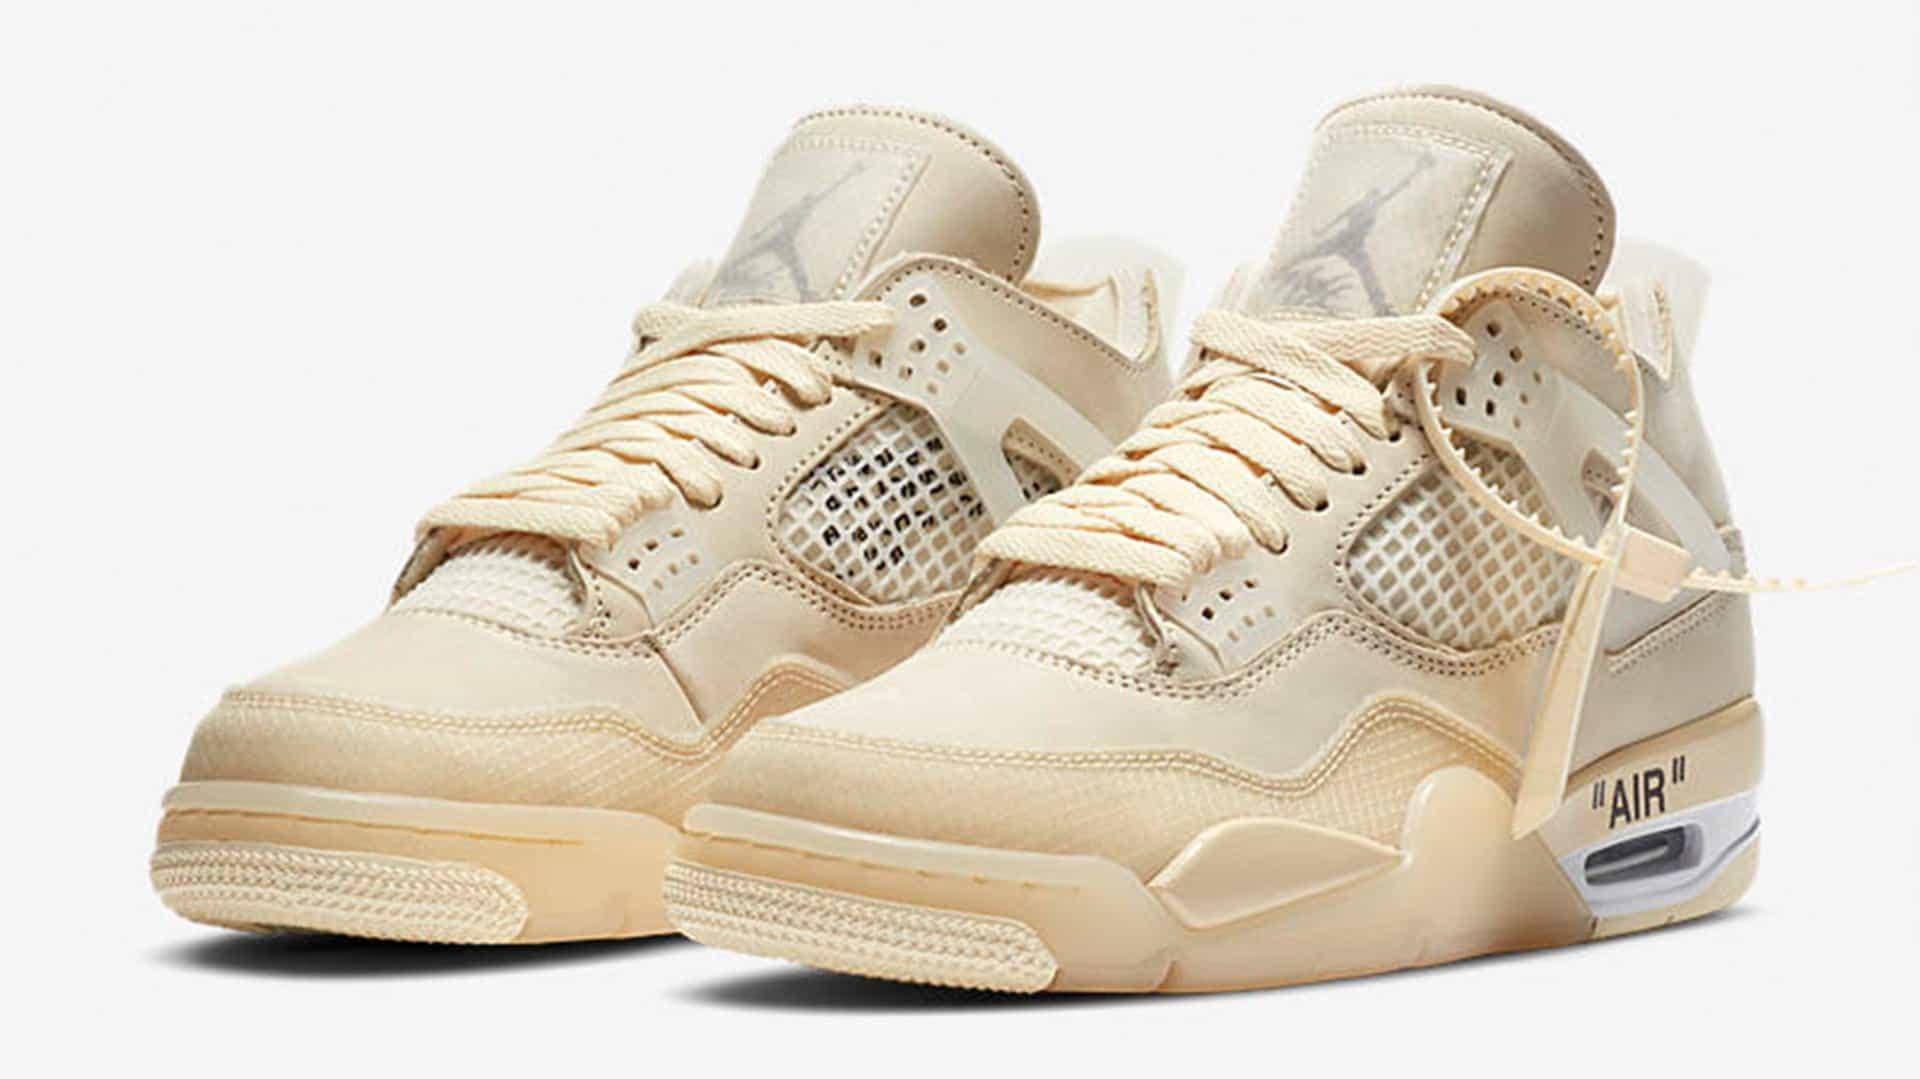 Off White X Air Jordan Official Image Released Neoteric